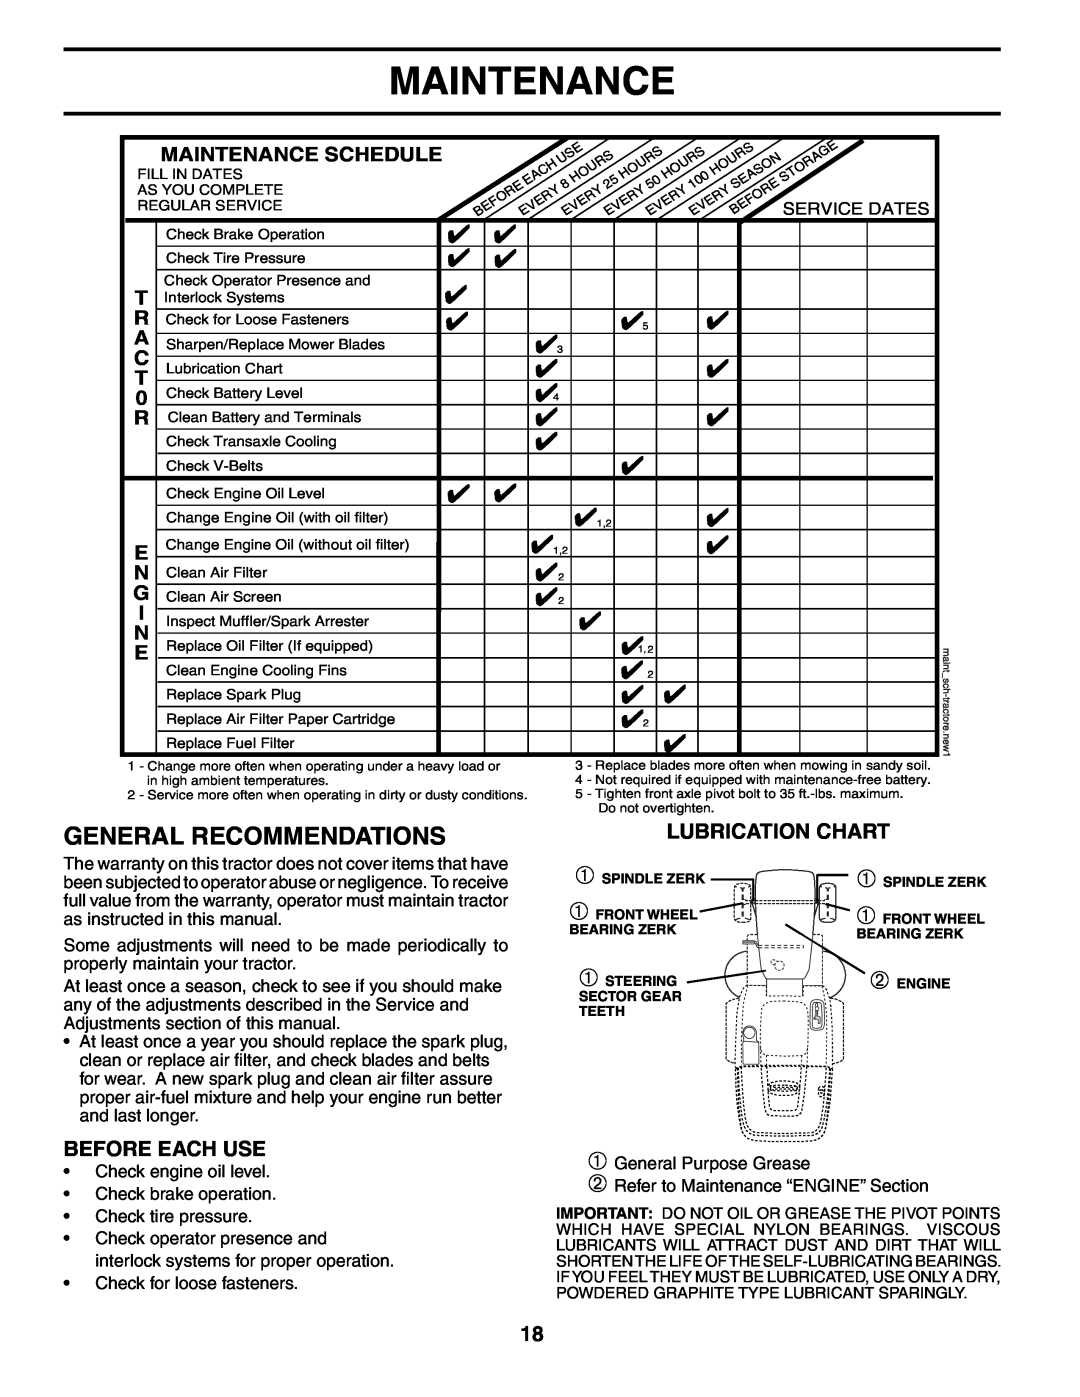 Husqvarna CTH180 XP 02764 General Recommendations, Lubrication Chart, Before Each Use, Maintenance Schedule 